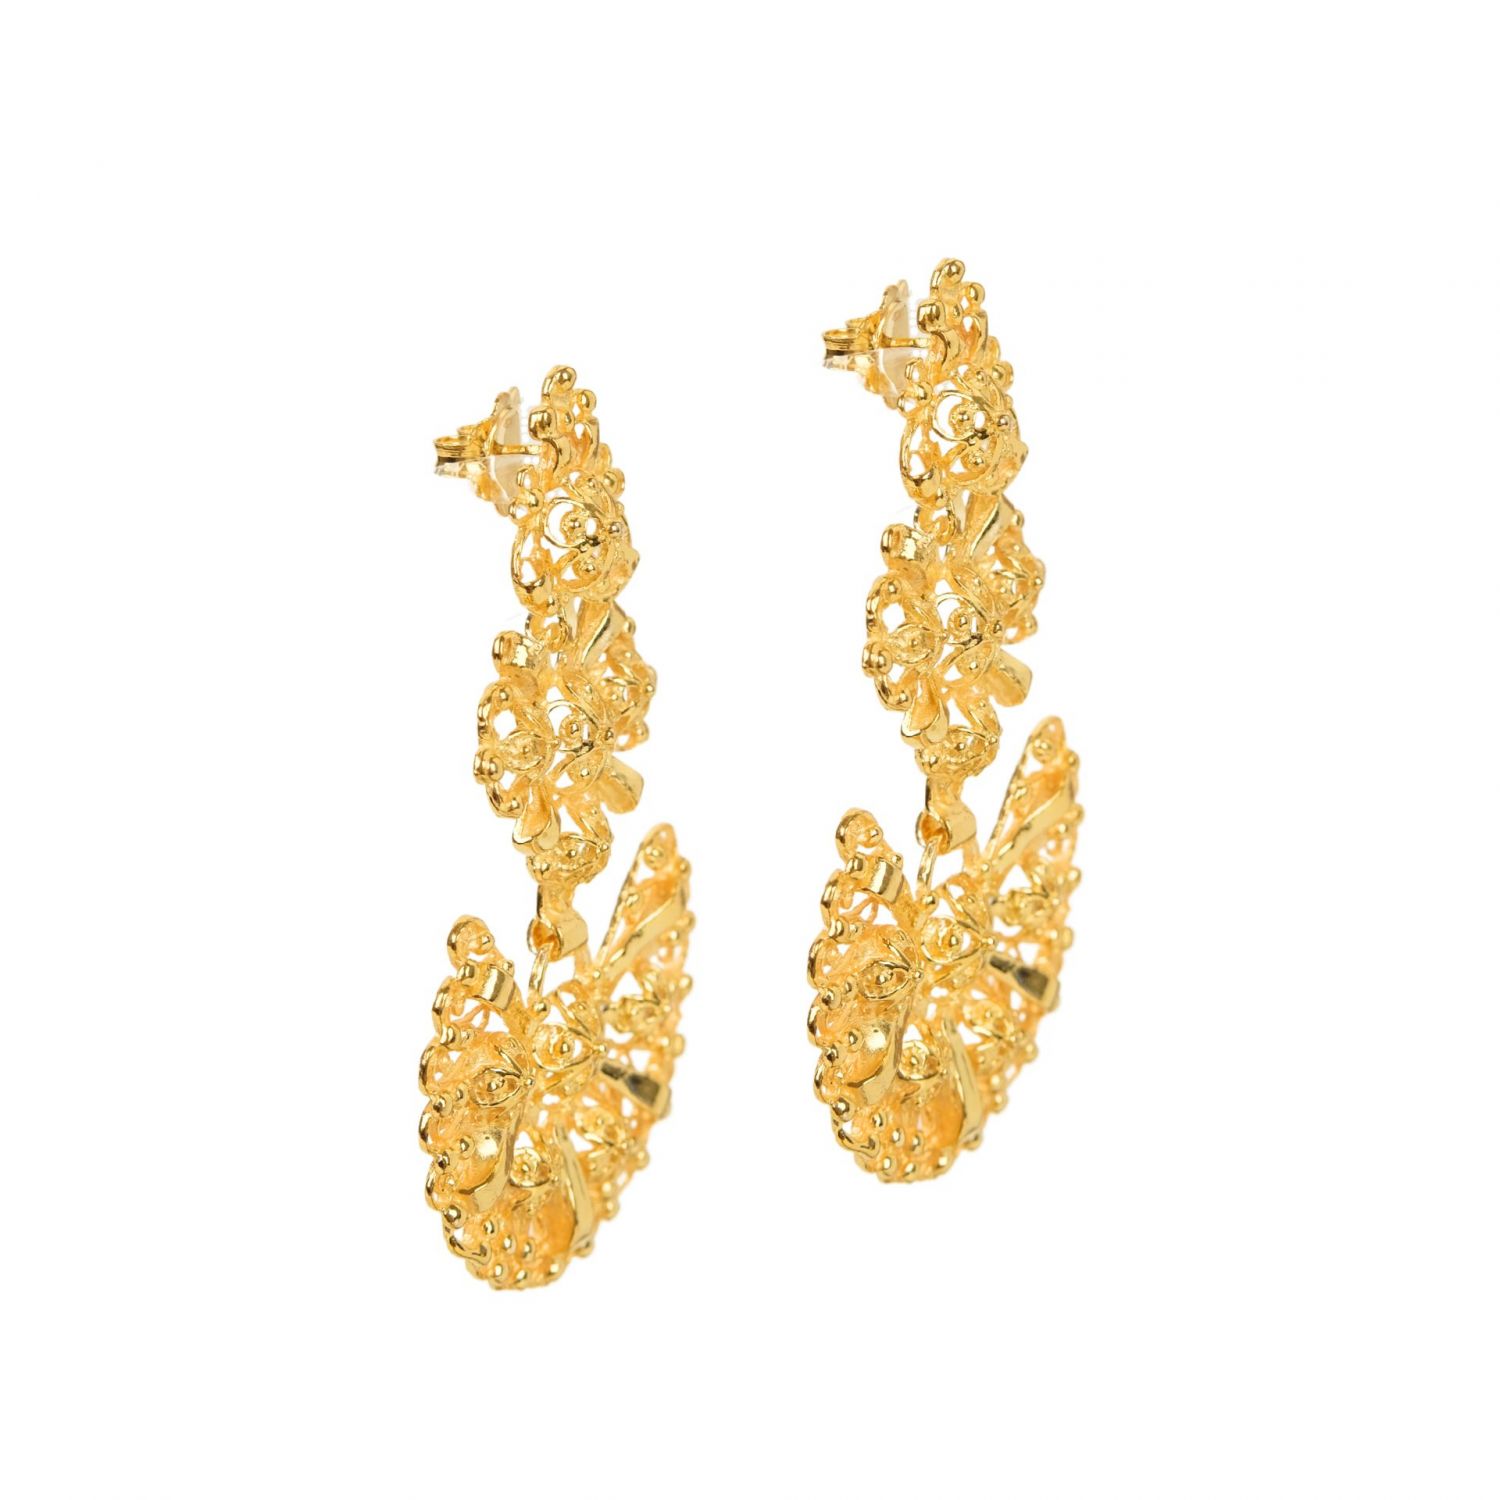 Galegos Earrings in Gold Plated Silver 